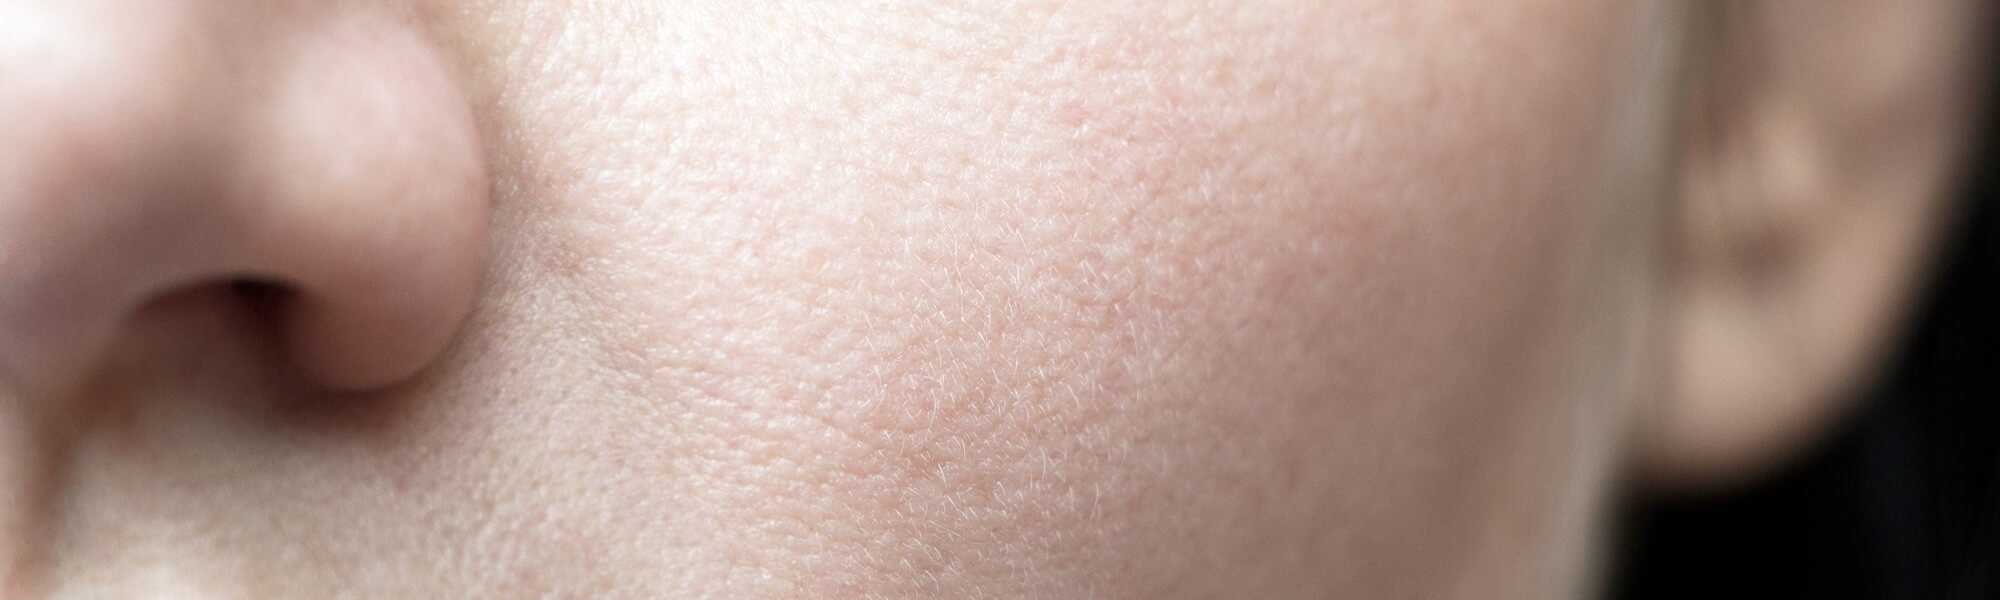 Homemade Tips To Get Rid Of Dry Skin